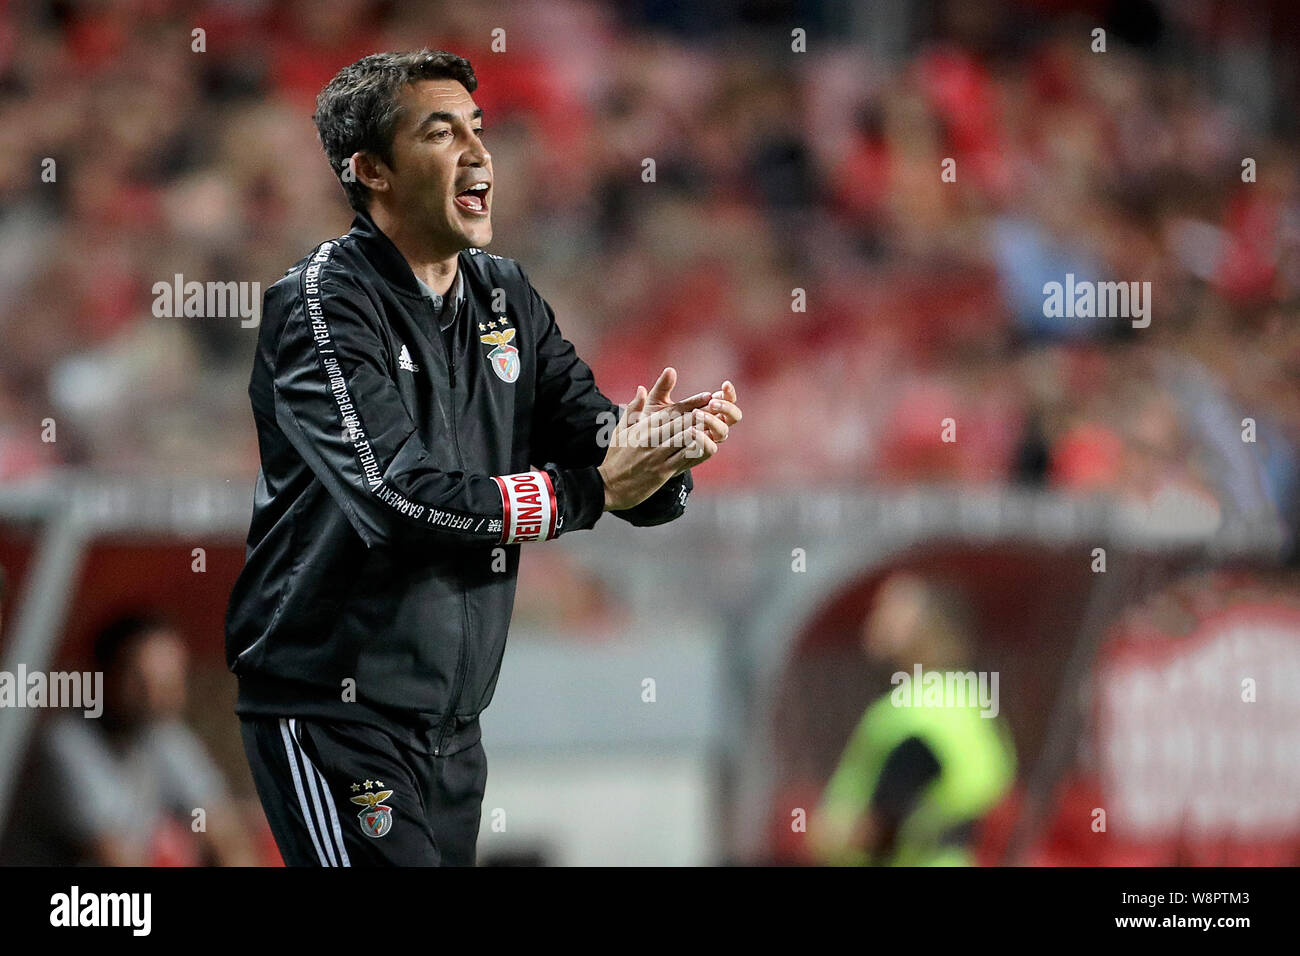 Lisbon, Portugal. 10th Aug, 2019. Coach Bruno Lage of SL Benfica in action during the League NOS 2019/20 footballl match between SL Benfica vs FC Paços de Ferreira. (Final score: SL Benfica 5 - 0 FC Paços de Ferreira) Credit: SOPA Images Limited/Alamy Live News Stock Photo